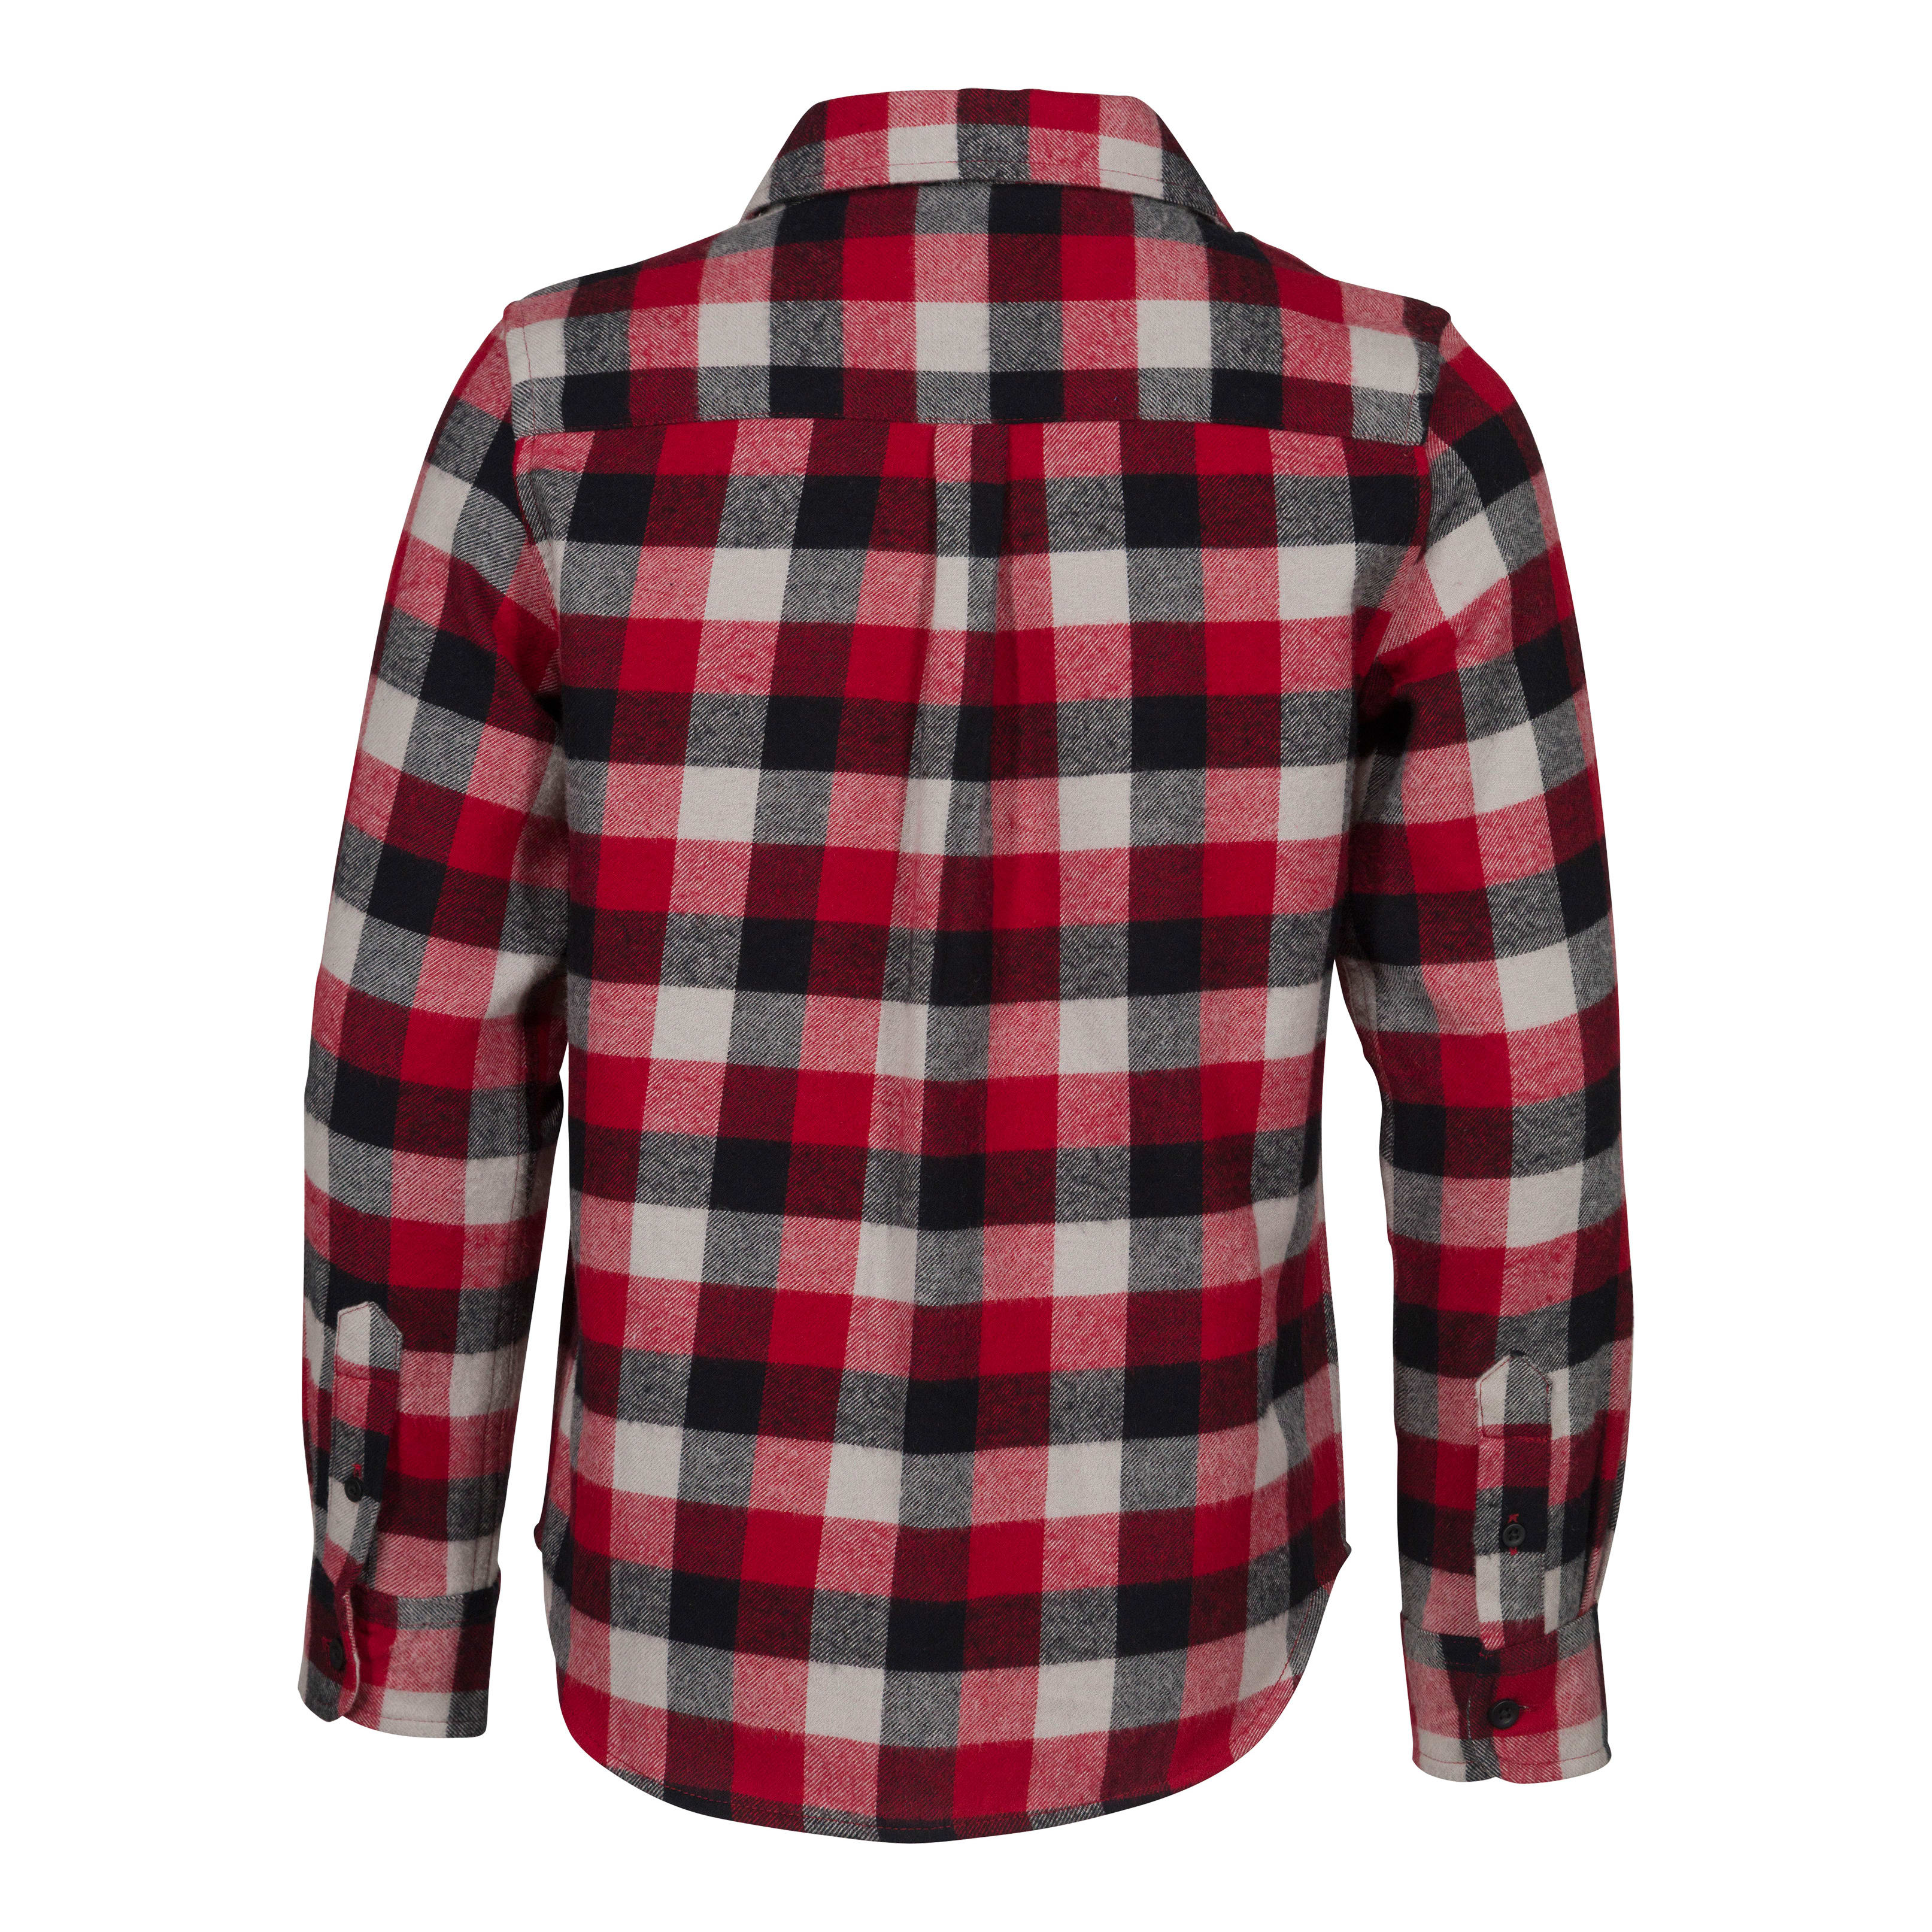 Outdoor Kids Boys' Long-Sleeve Flannel Shirt - Red/Black - Back View